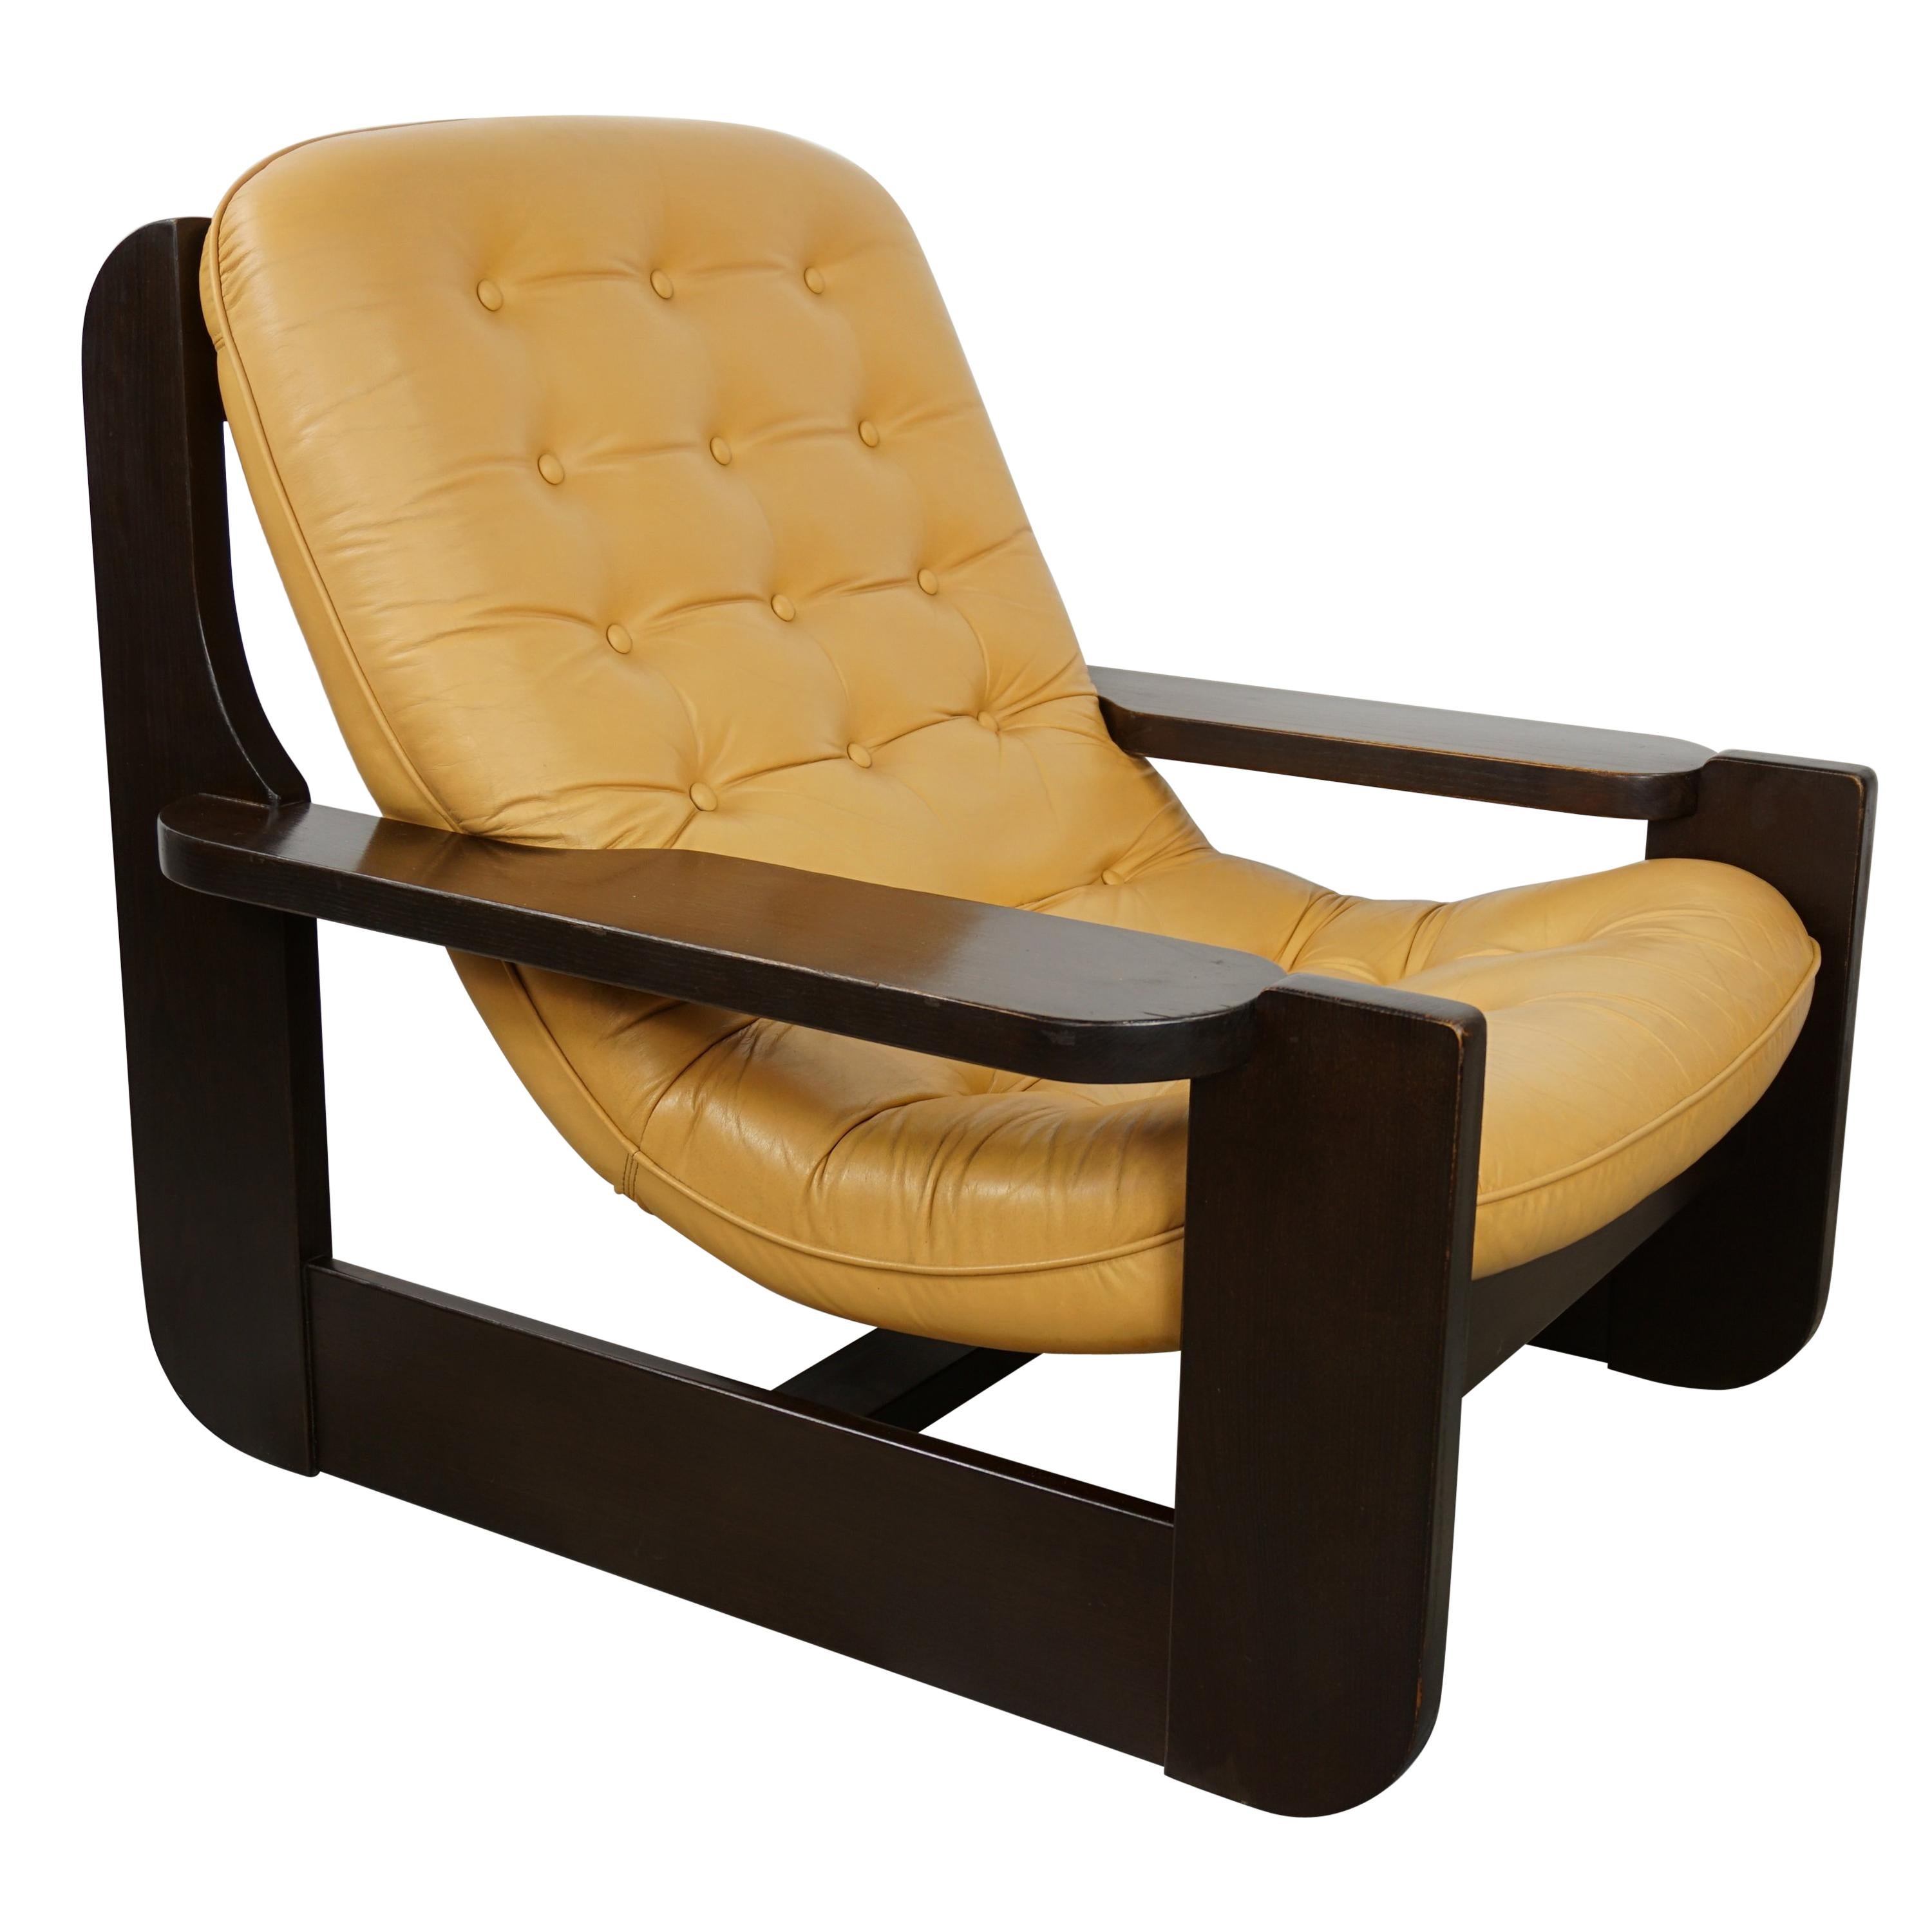 1960s Design Oak Wooden and Natural Leather Lounge Armchair